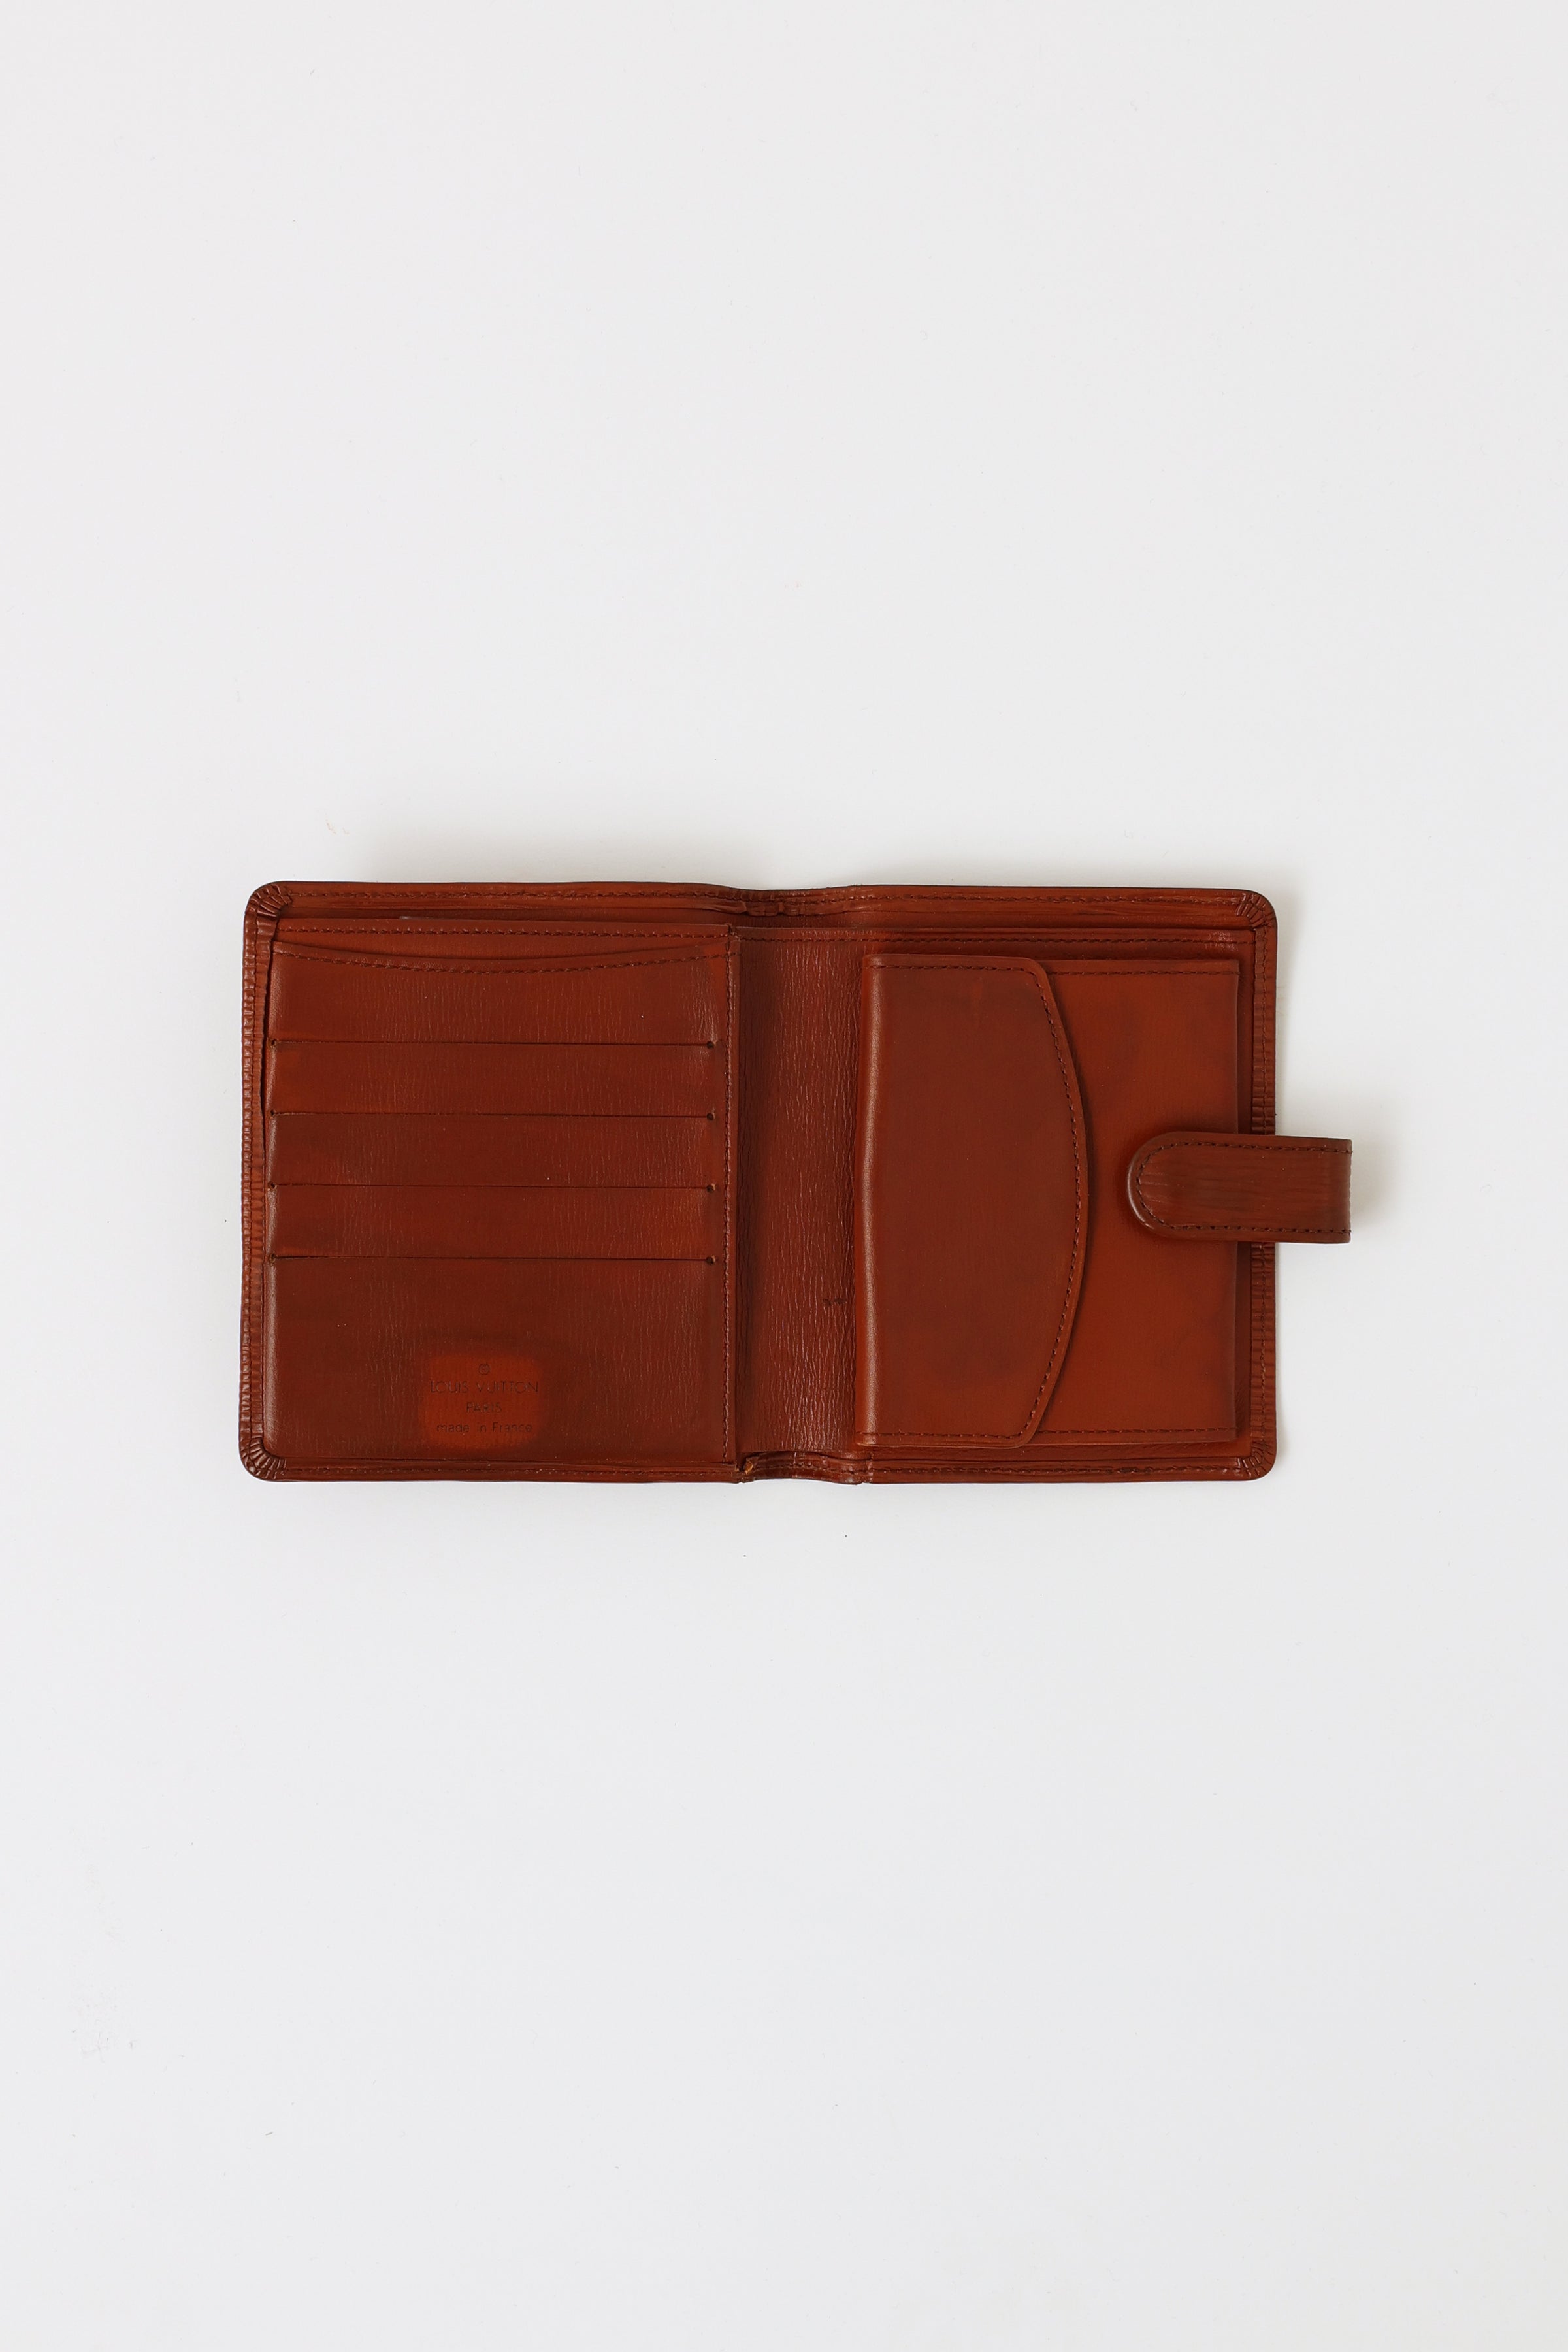 Louis Vuitton French Wallet, Small Leather Goods - Designer Exchange | Buy  Sell Exchange